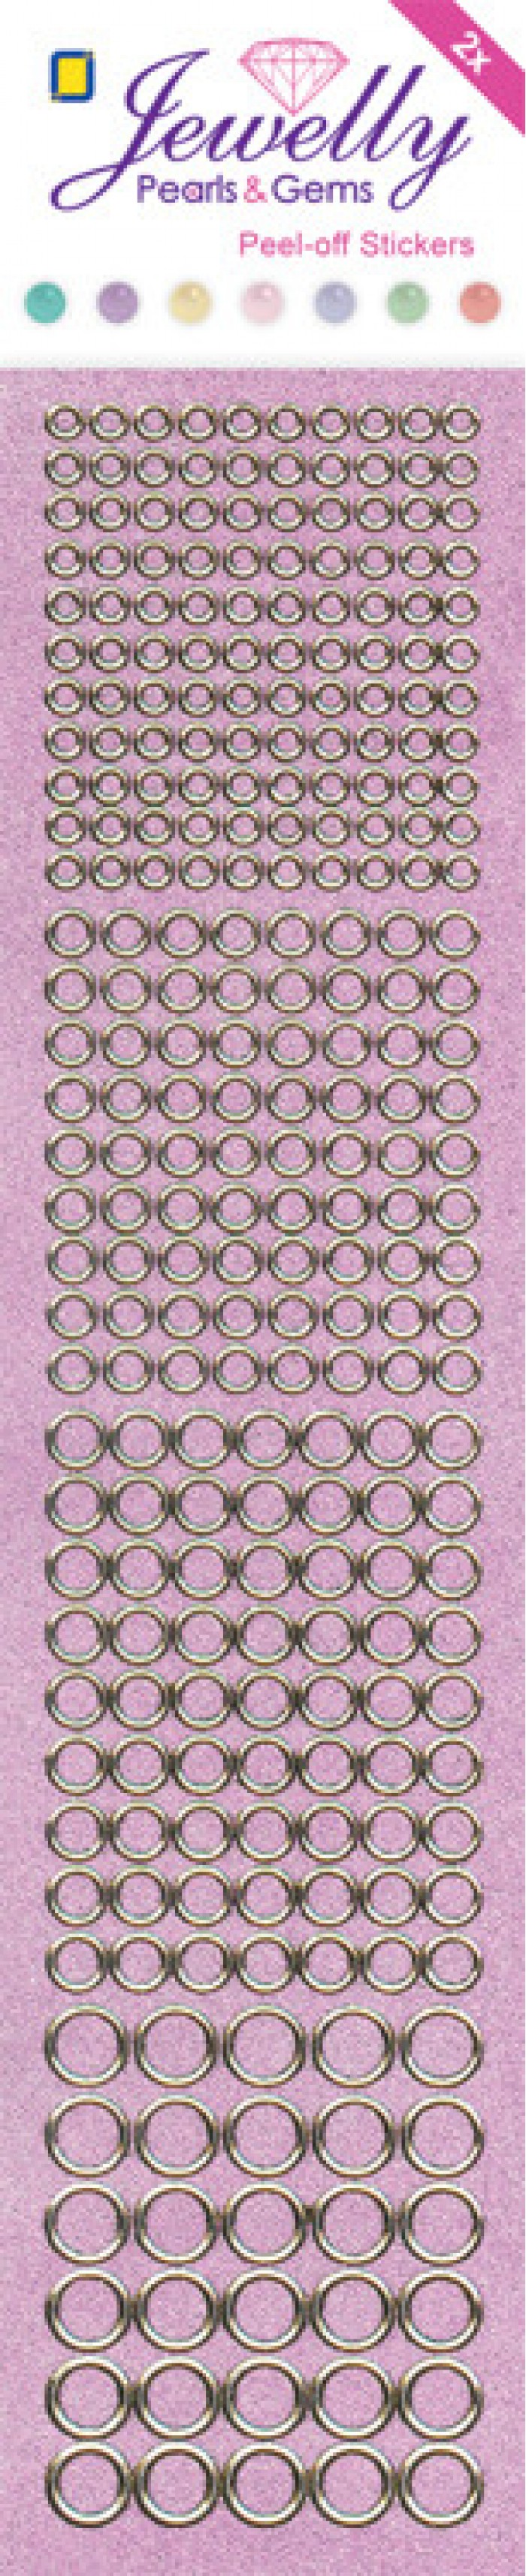 Jewelly P&G Dots Pearl Pink 2 sheets 5x23cm